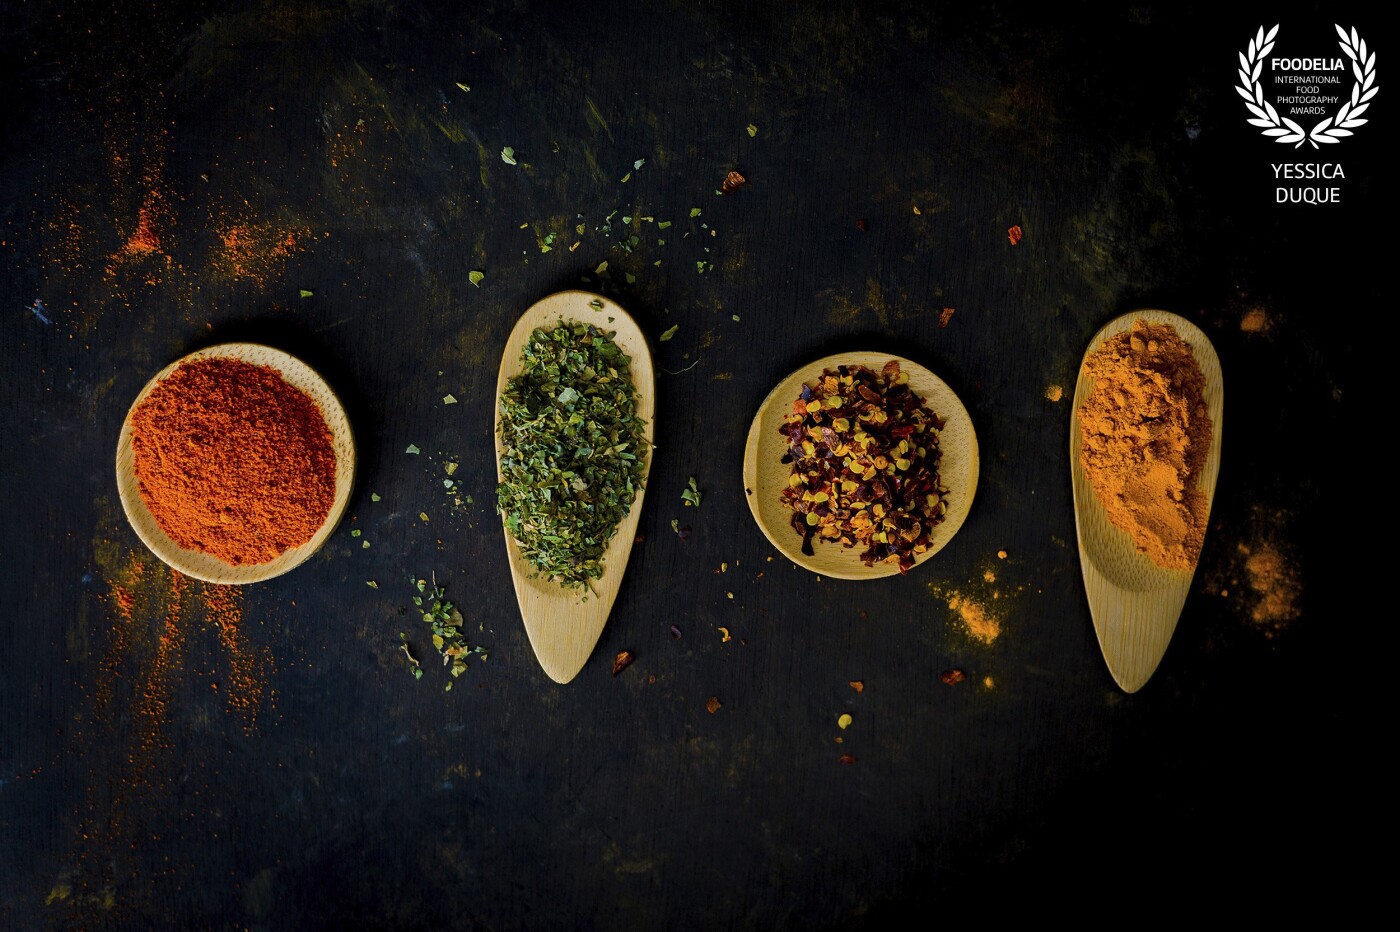 Indian Spices. A beautiful collaboration with Chef Raqeebah Hussain,  some of her secrets in one picture.<br />
Camera: Canon 5D mark iii<br />
Lens: 50 mm <br />
Settings: ISO 250, 1/125 sec at ƒ/2.8, daylight